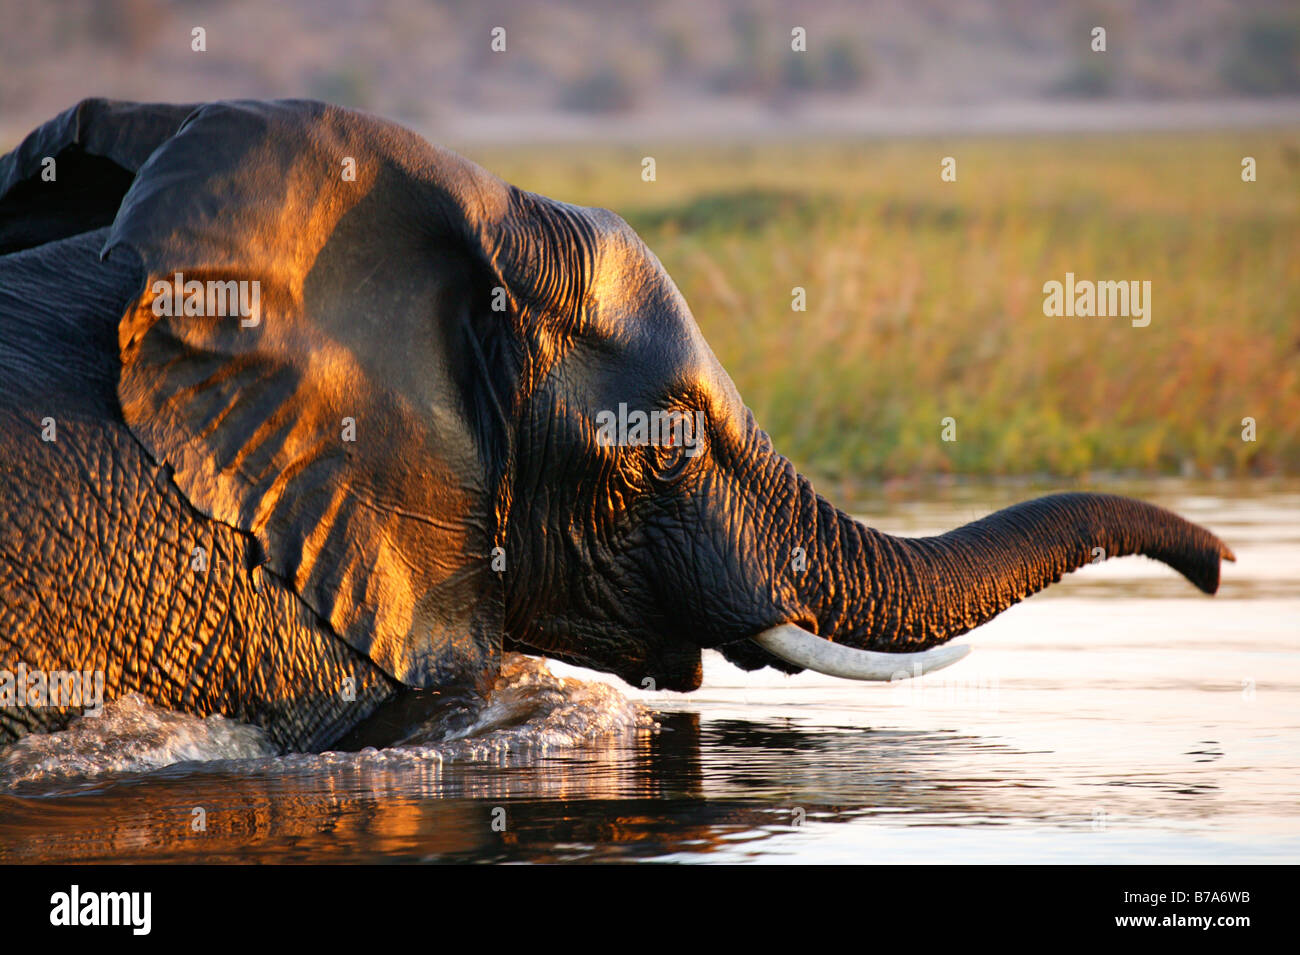 Tight portrait of a shiny, wet elephant emerging from the Chobe river after crossing Stock Photo